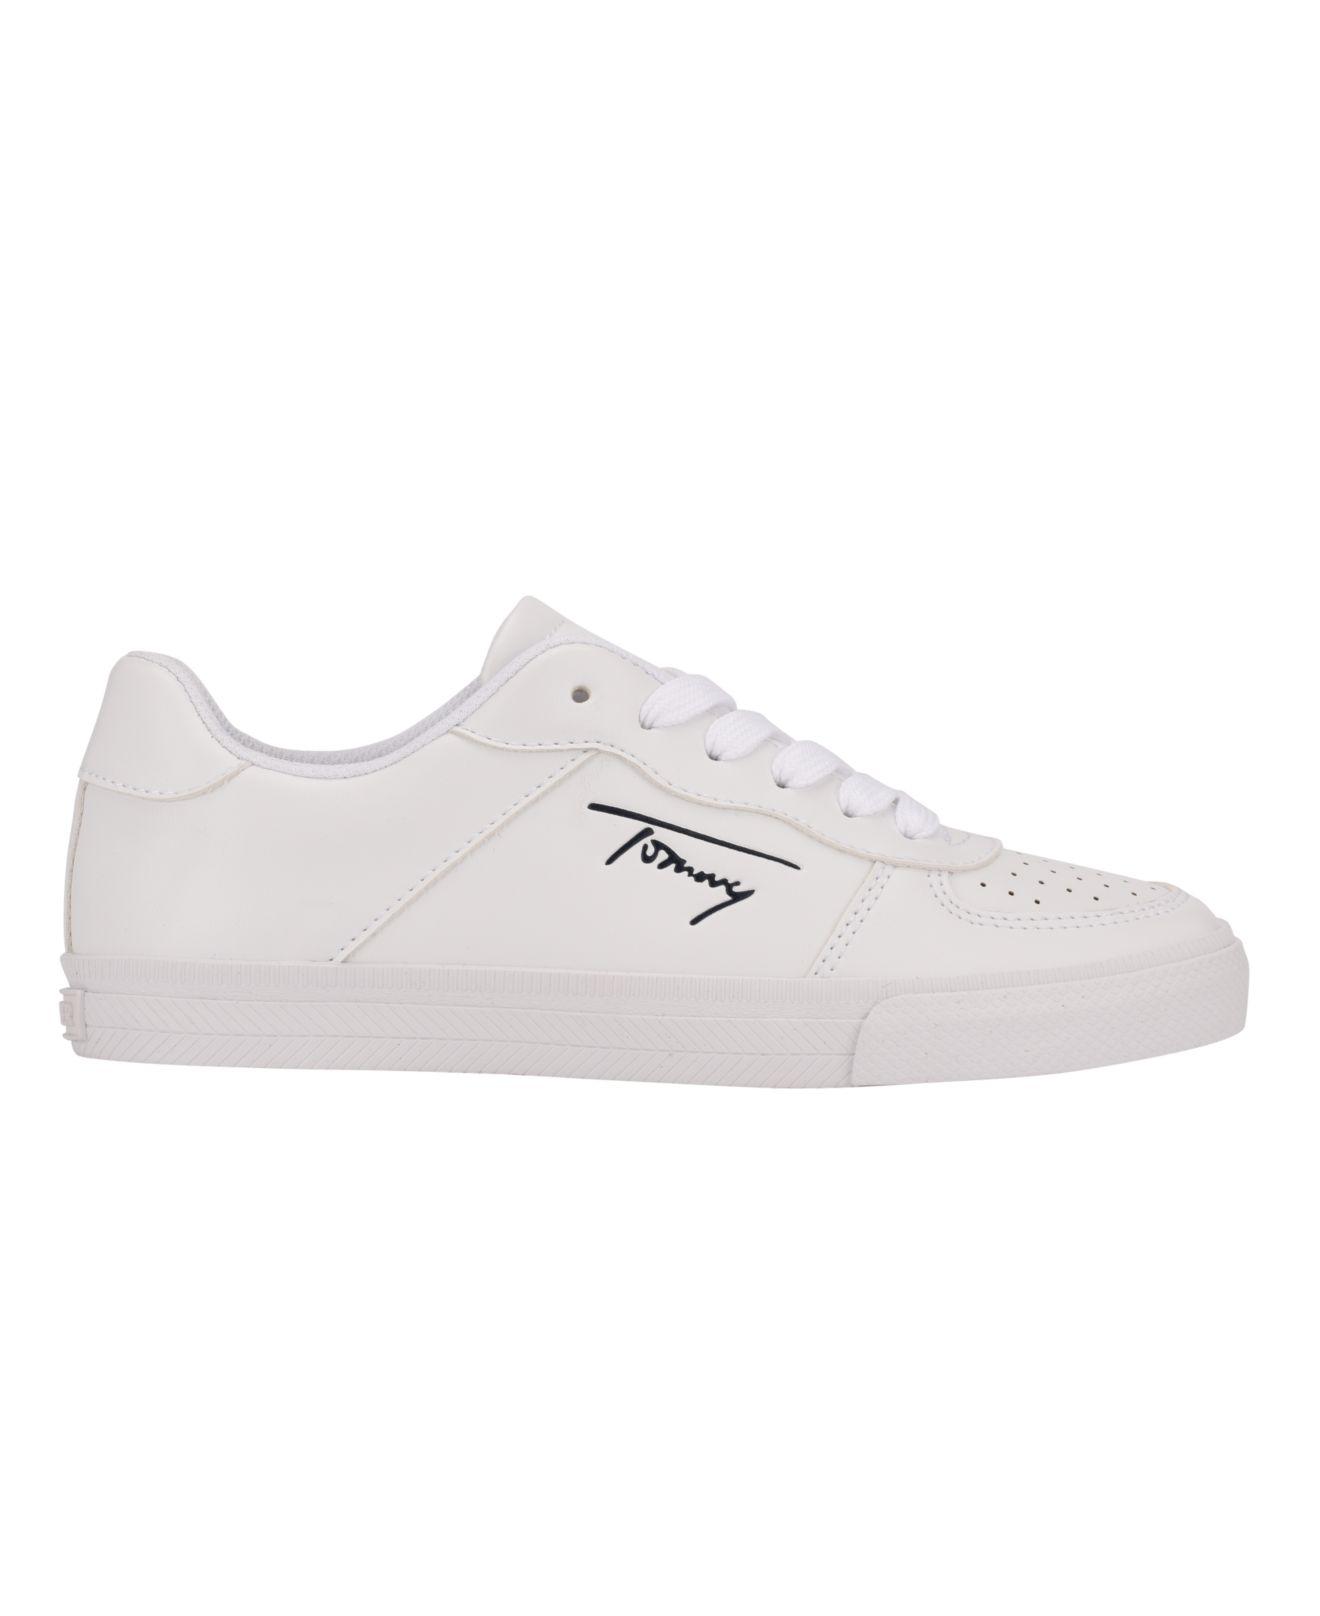 Tommy Hilfiger Laguna Casual Lace Up Sneakers in White | Lyst